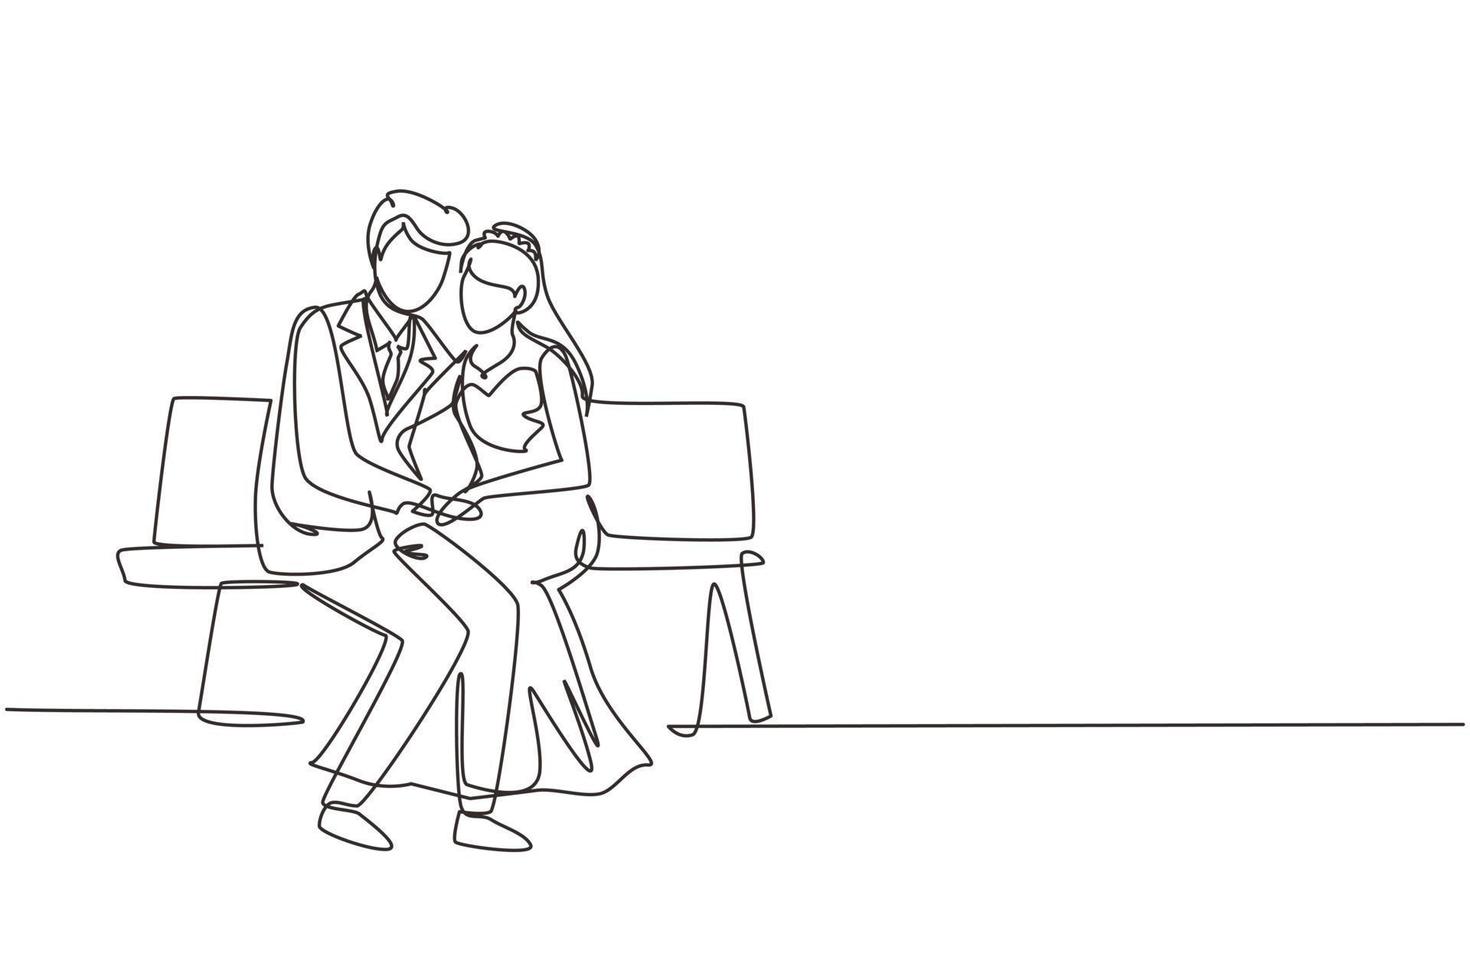 Single one line drawing romantic married couple. Man with suit and woman with wedding dress sitting on bench in city park. Intimacy celebrates wedding party. Continuous line draw design graphic vector